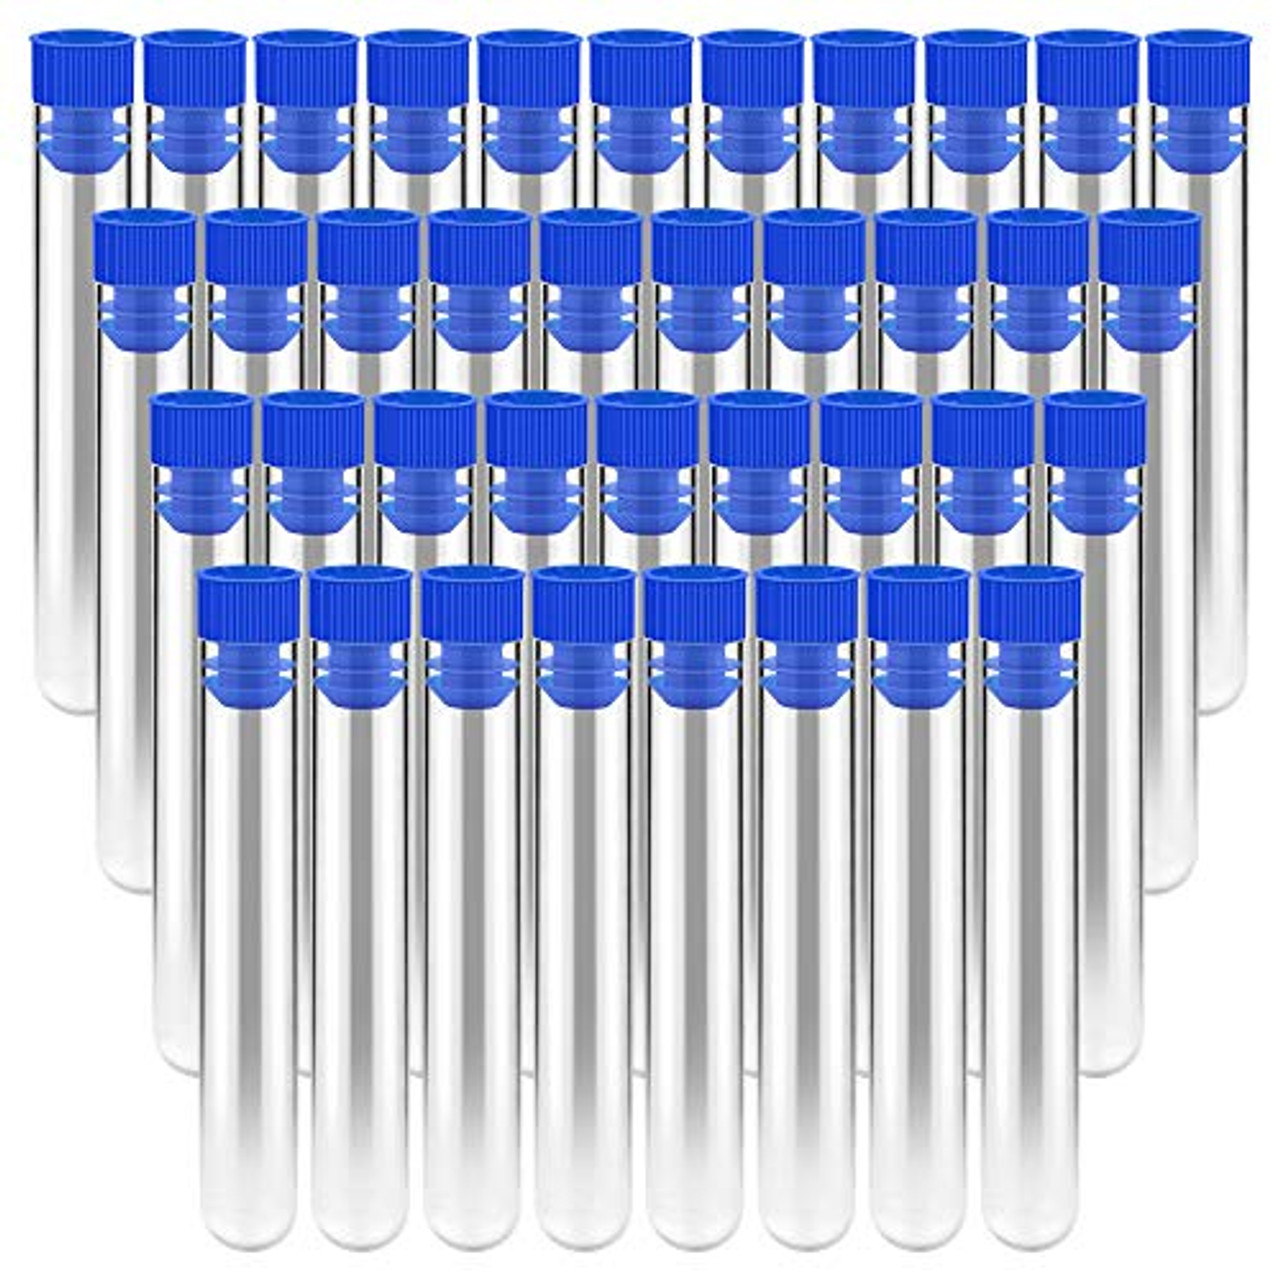 WYKOO 50 Pcs 13ml Clear Plastic Test Tubes with Blue Cap, 16x100mm Vials  Container Sample Tubes